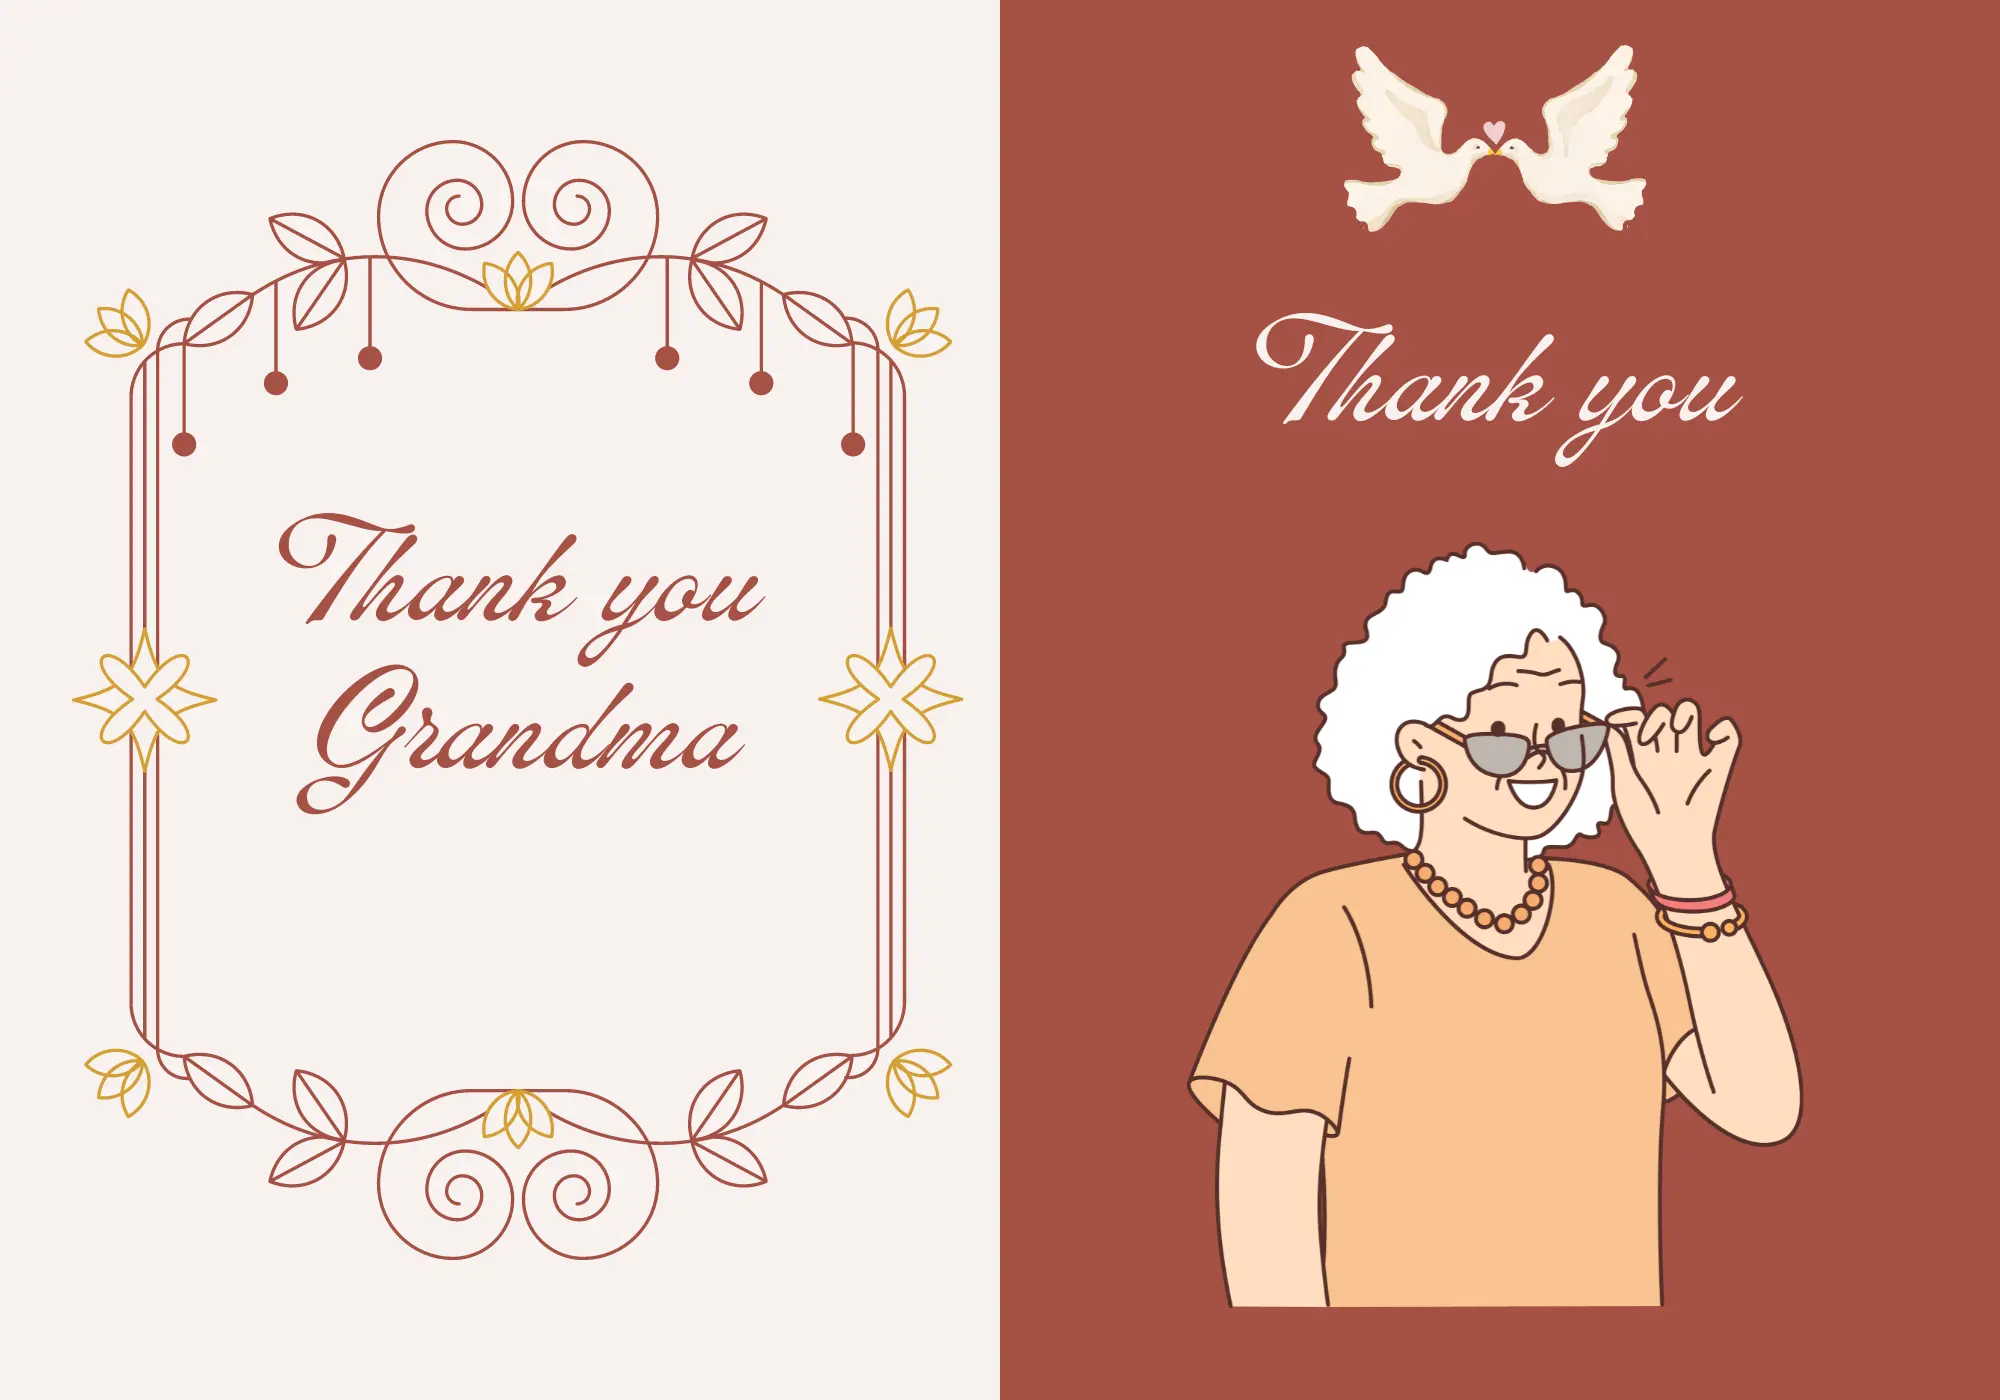 Thank You Messages For Grandma